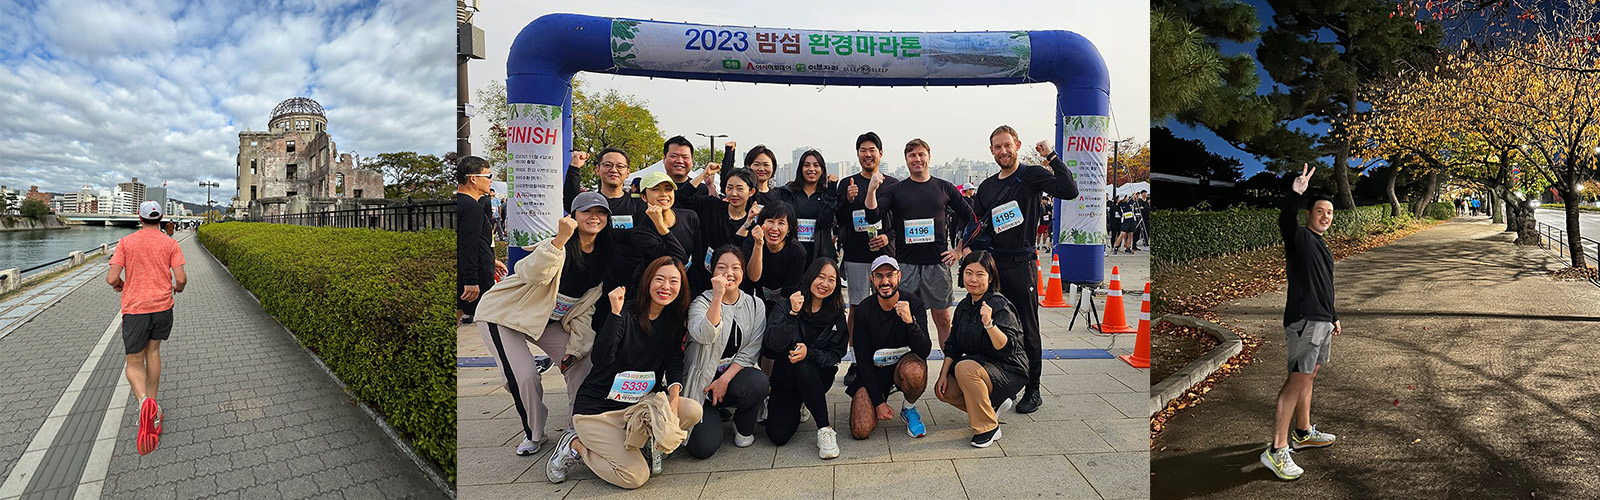 Japan and Korea teams put in the miles for charity